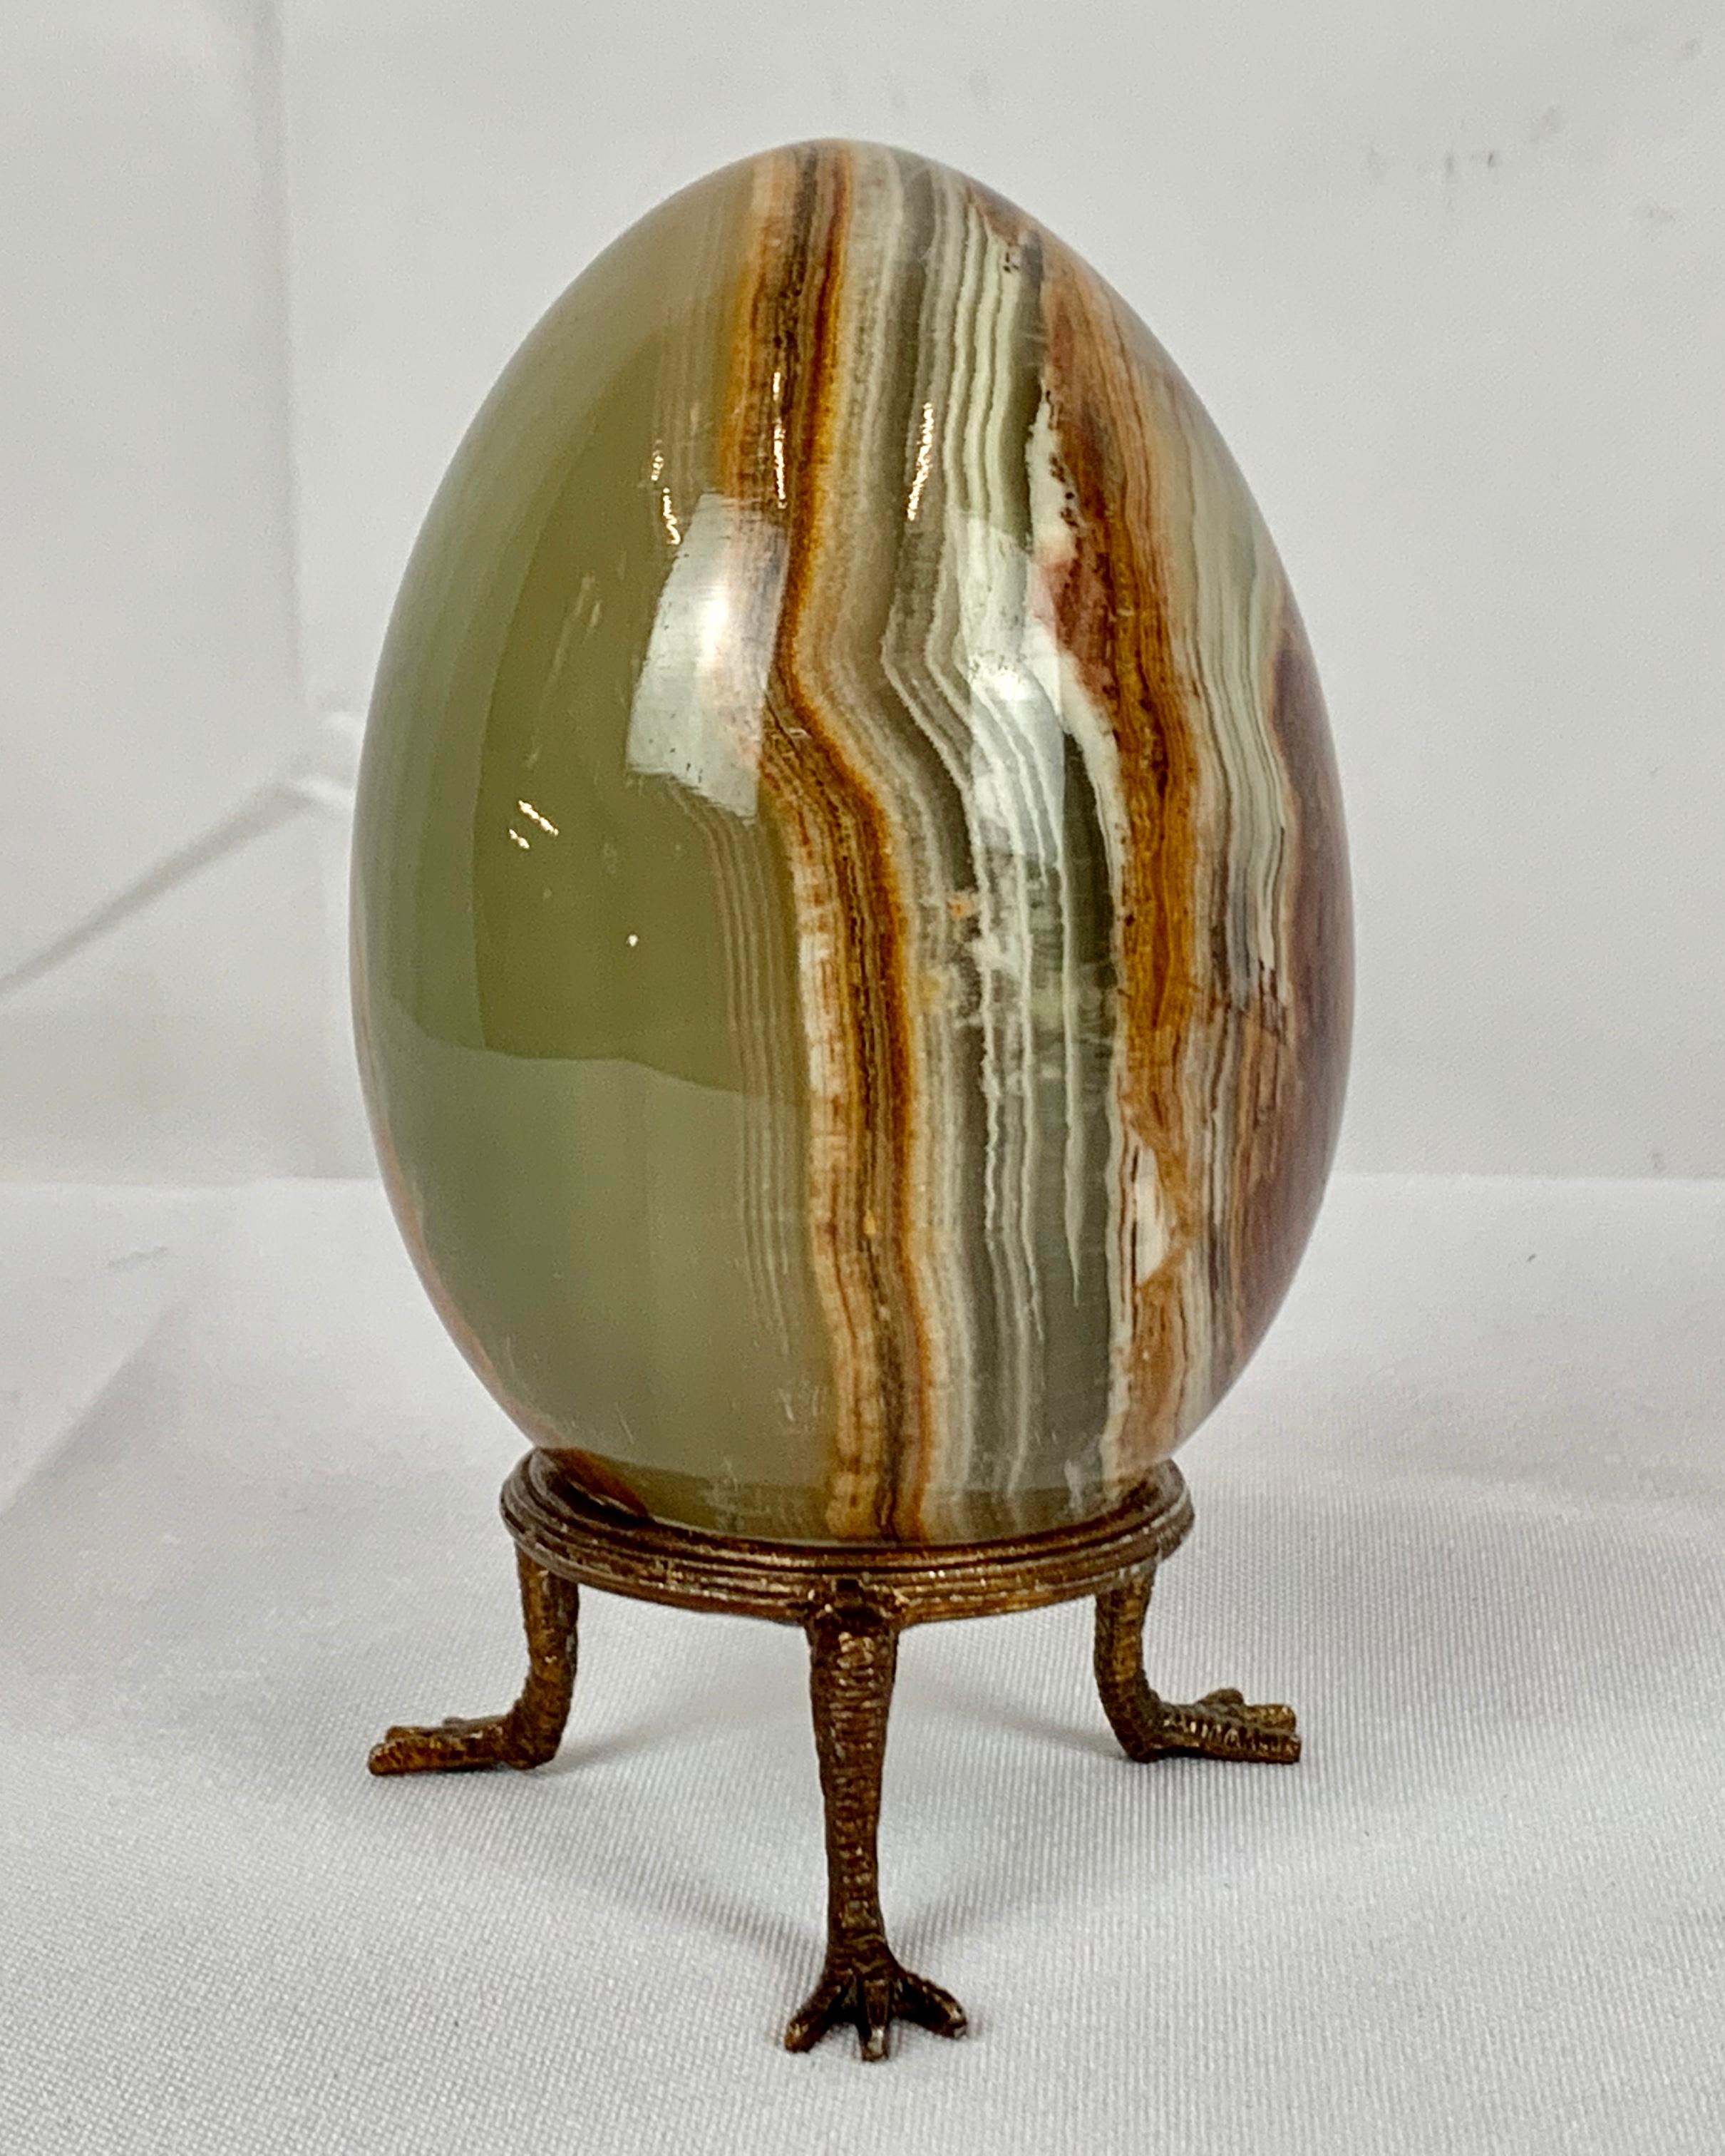 Handsomely marked natural onyx egg on a gilt three legged stand with bird feet.
Purchased by the owner and kept in a case since the 1970's.
Measures: Height-4.75
Diameter-3